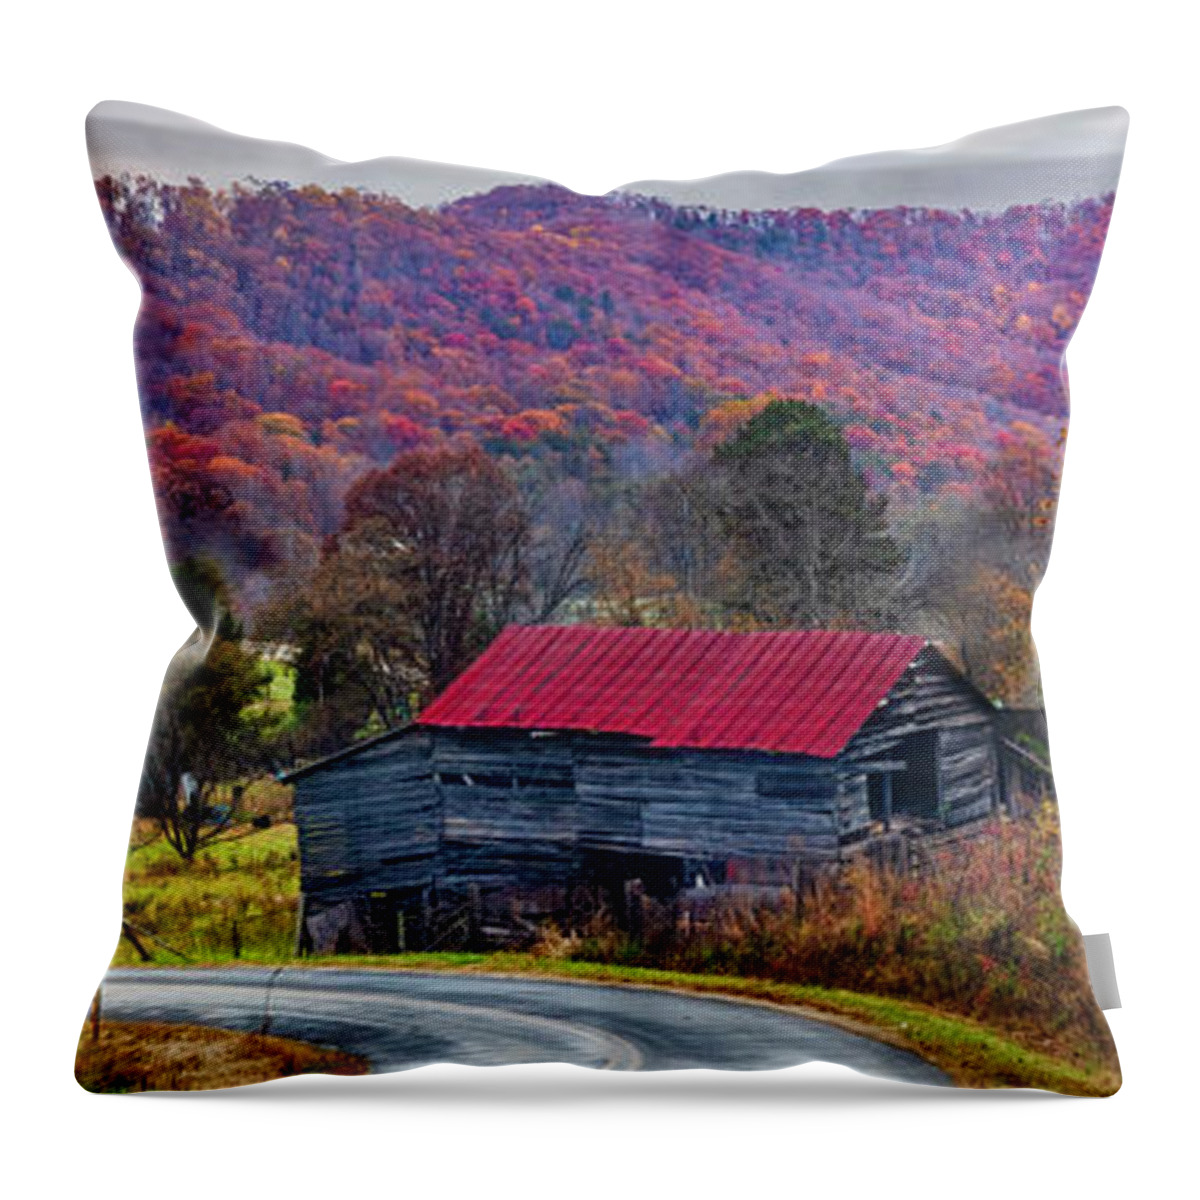 Barns Throw Pillow featuring the photograph Winding Country Roads by Debra and Dave Vanderlaan